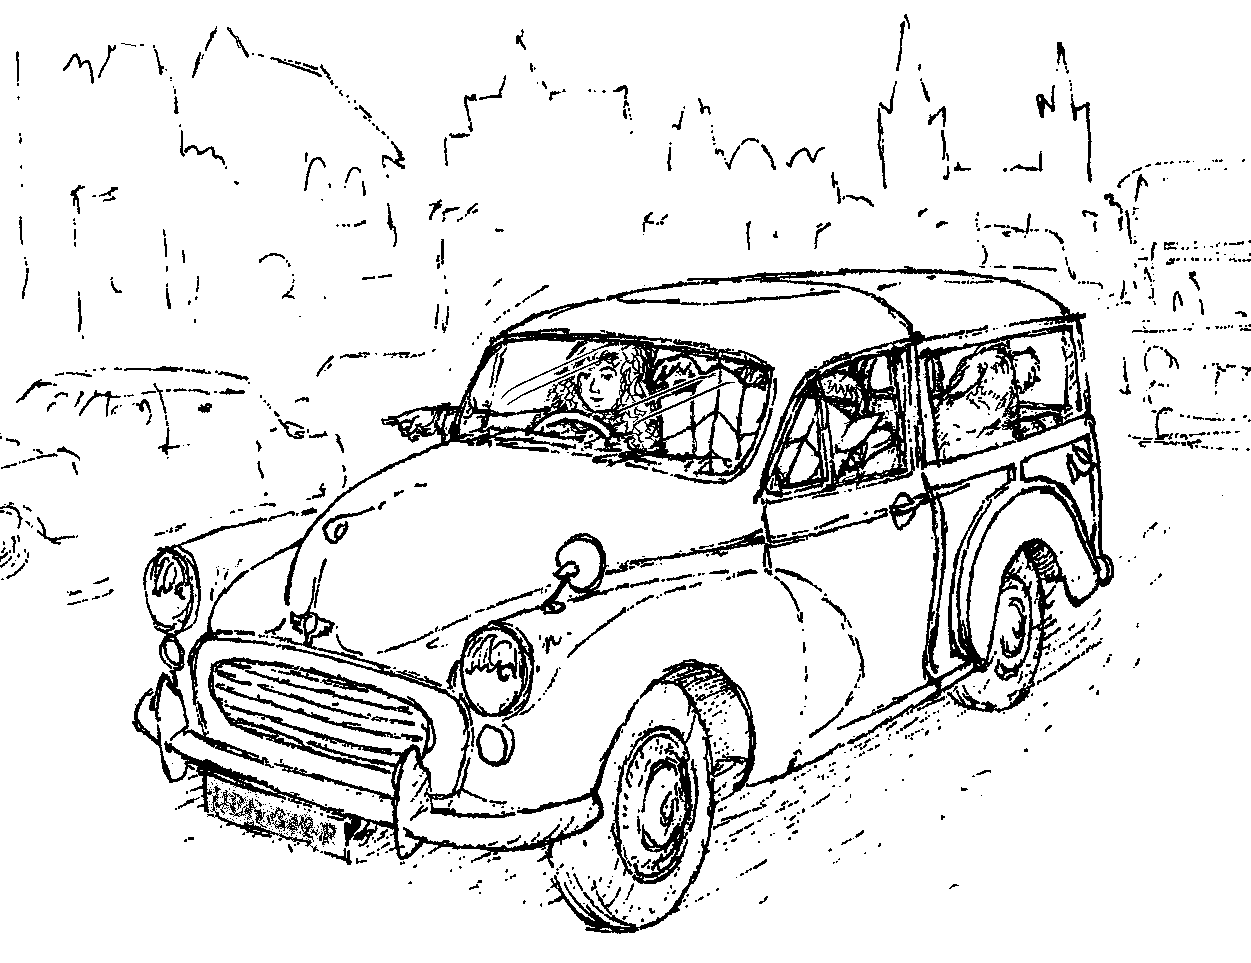 Click to download an illustration of: Car journey